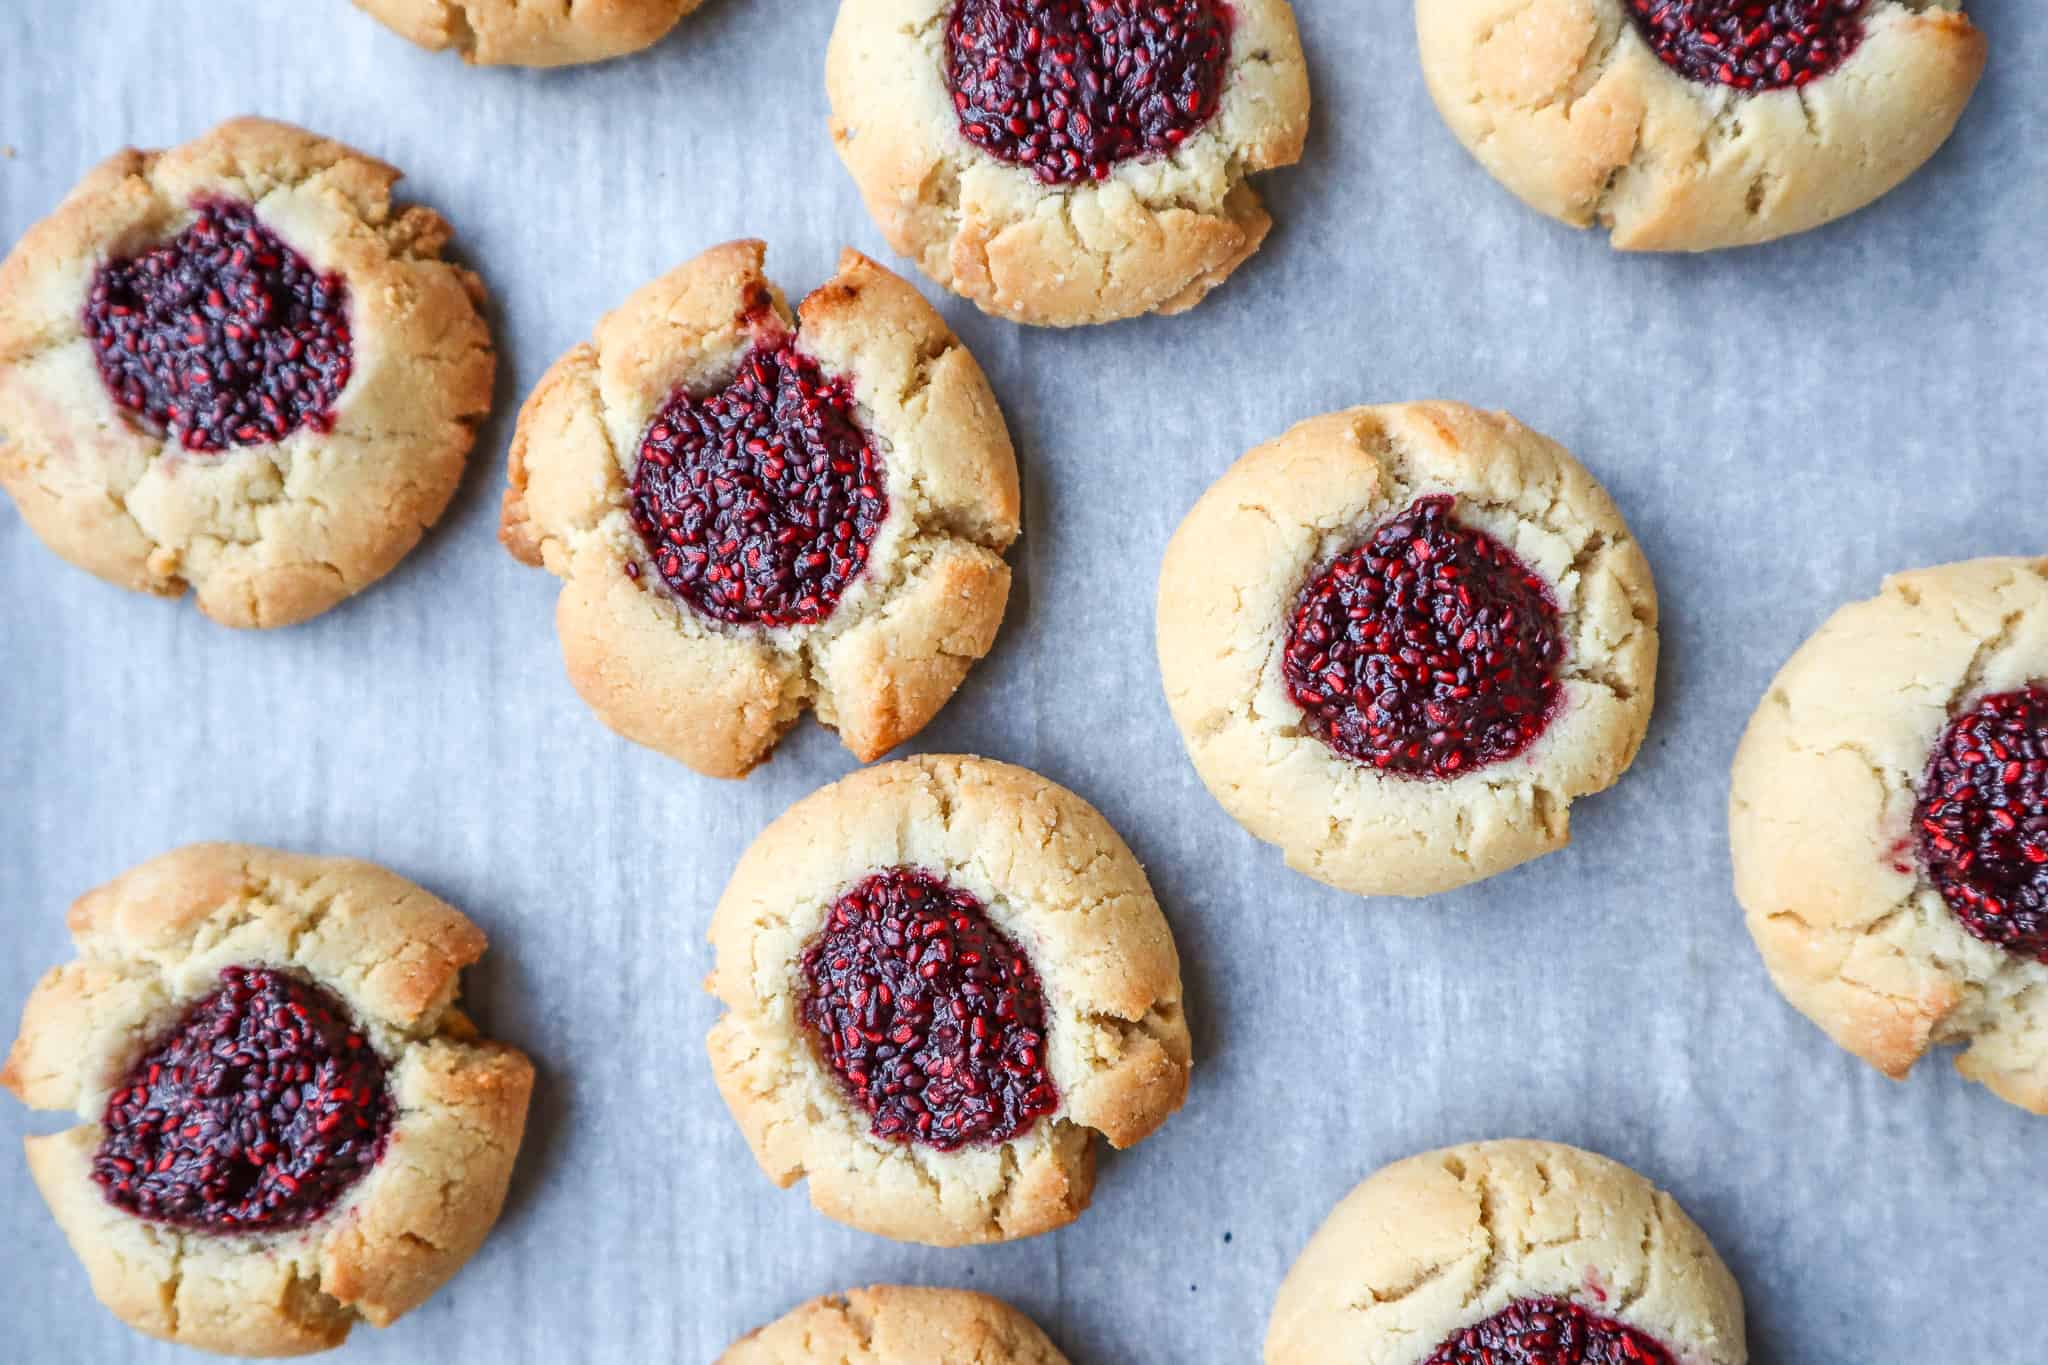 Eat at a Global Food Extravaganza to Determine the Season That Best Represents You Berry thumbprint cookies